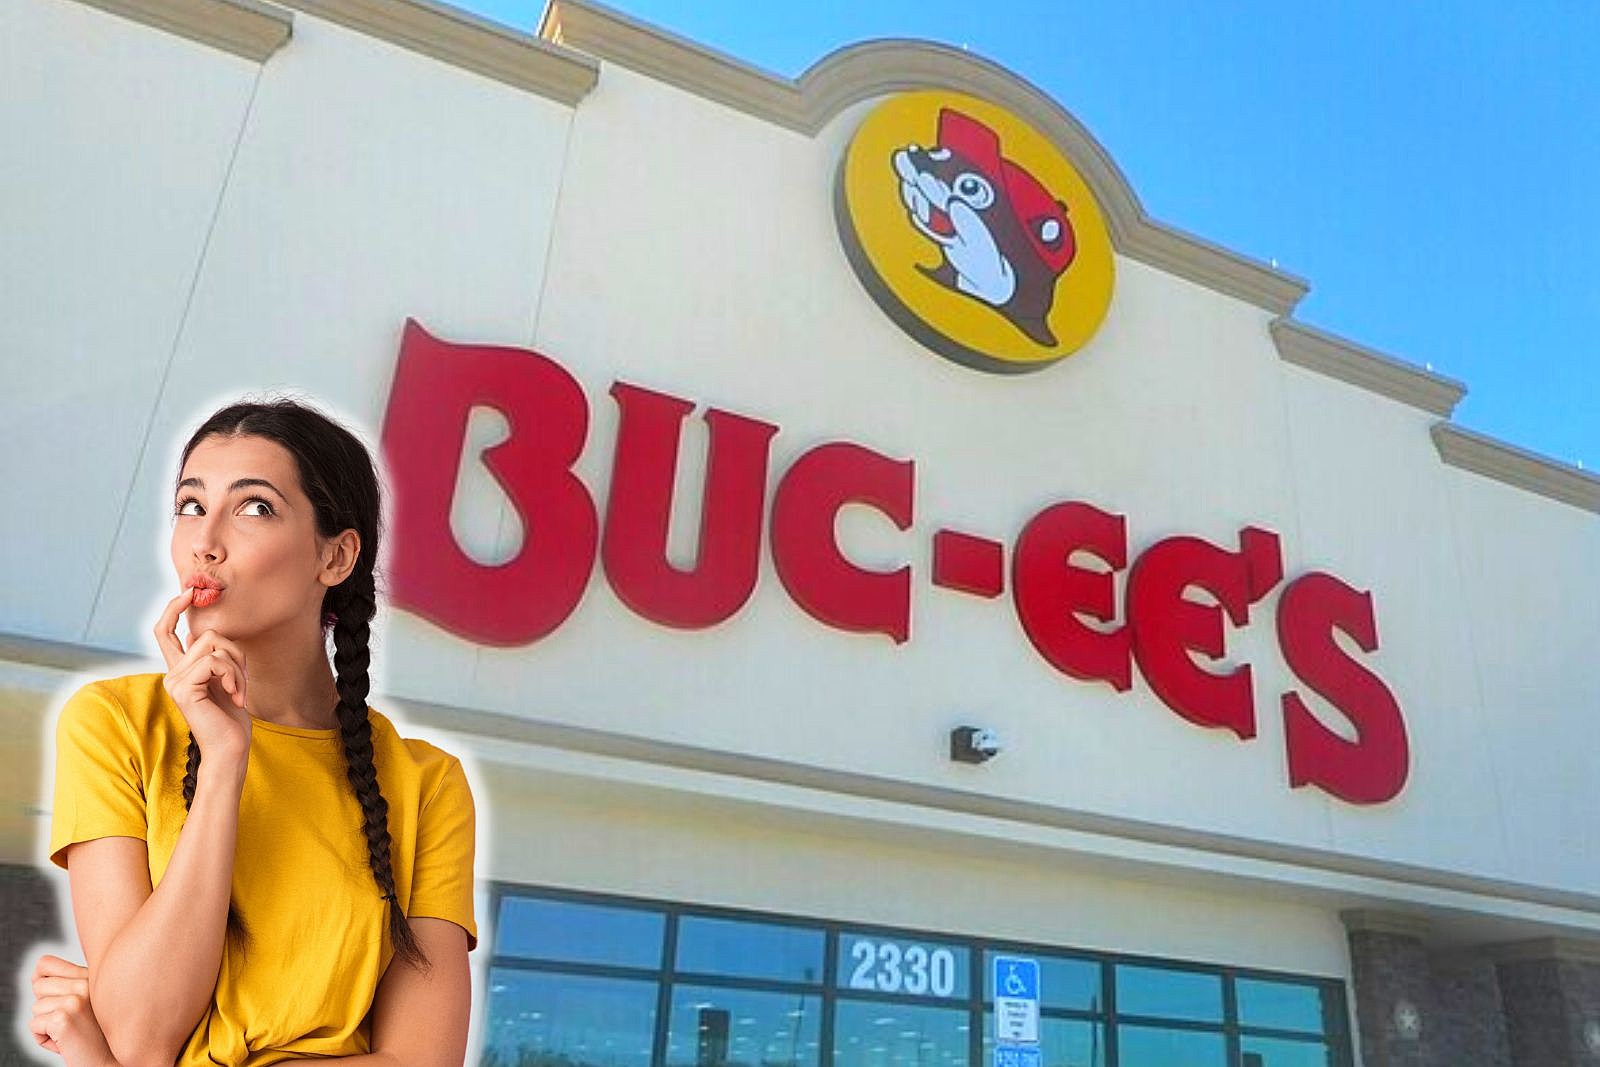 Discover 12 Surprising Facts Behind Buc-ees’ Success Story In Texas